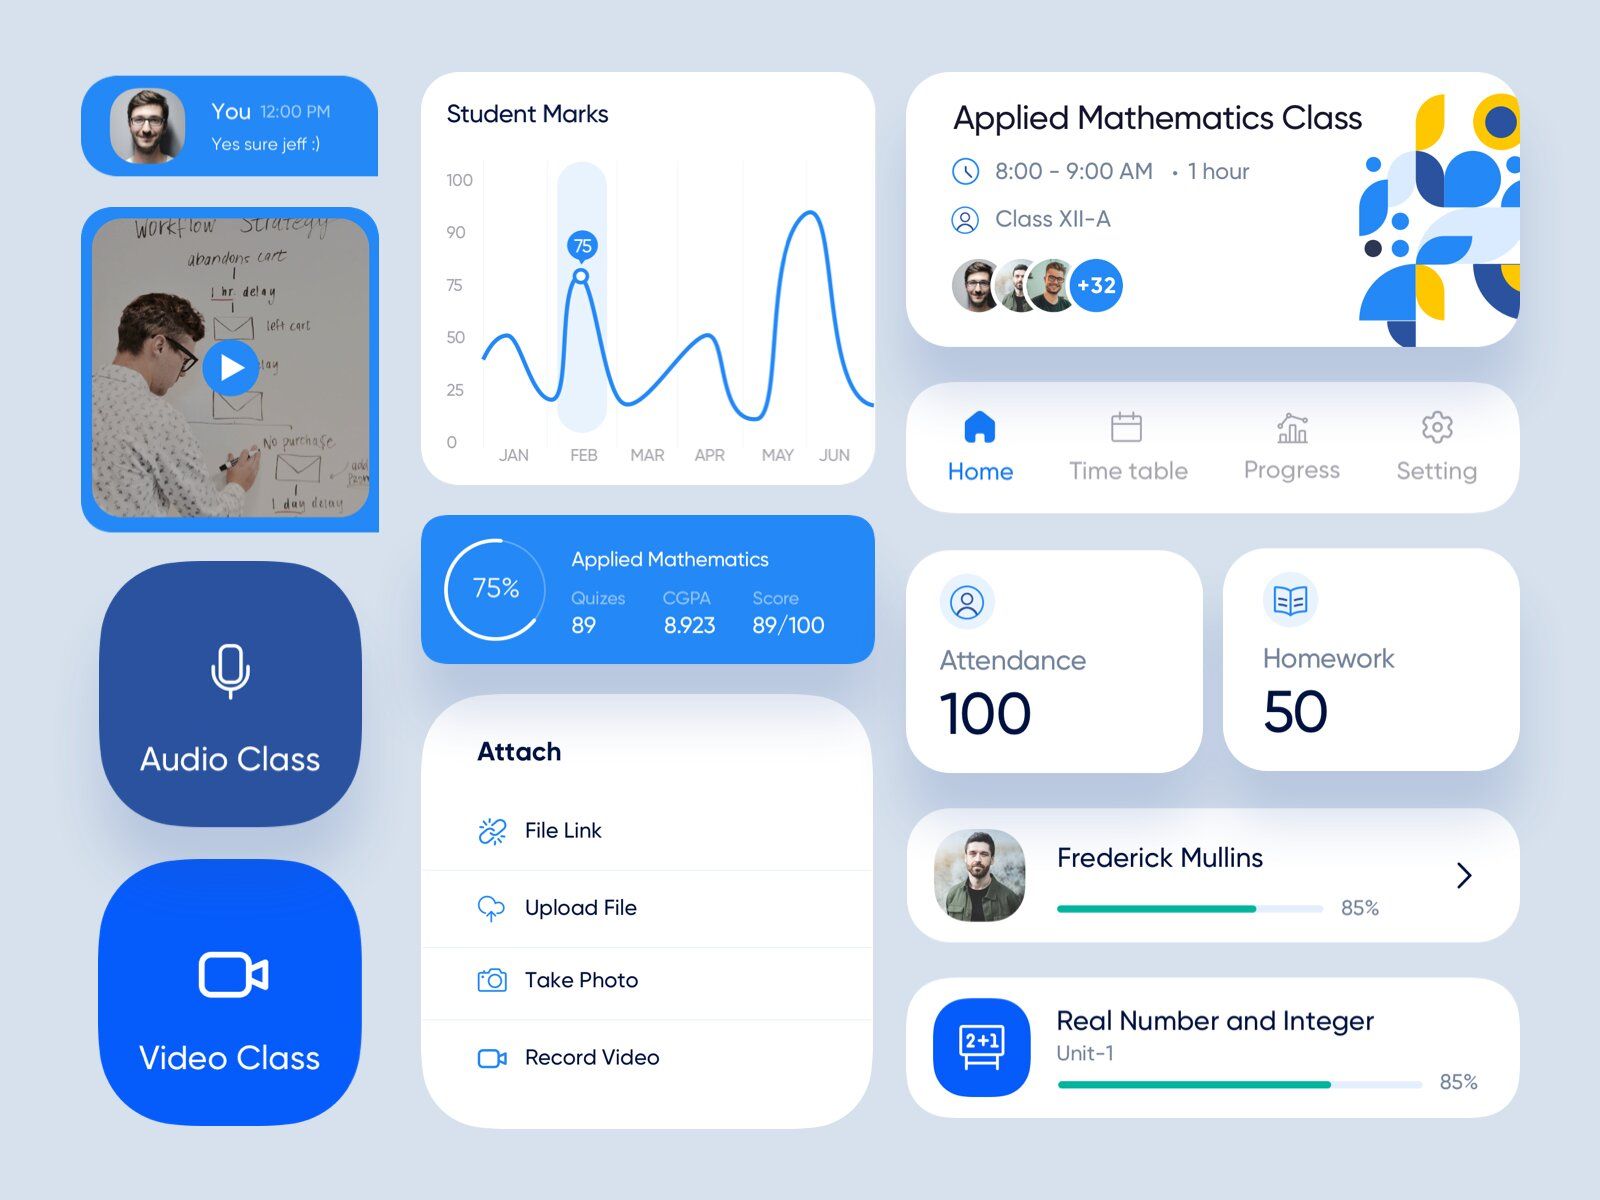 An LMS software usually has a wider scope of features including admin panel that may go beyond eLearning website or app functionality (*image by [Vivek Sati](https://dribbble.com/VivekSati){ rel="nofollow" .default-md}*)